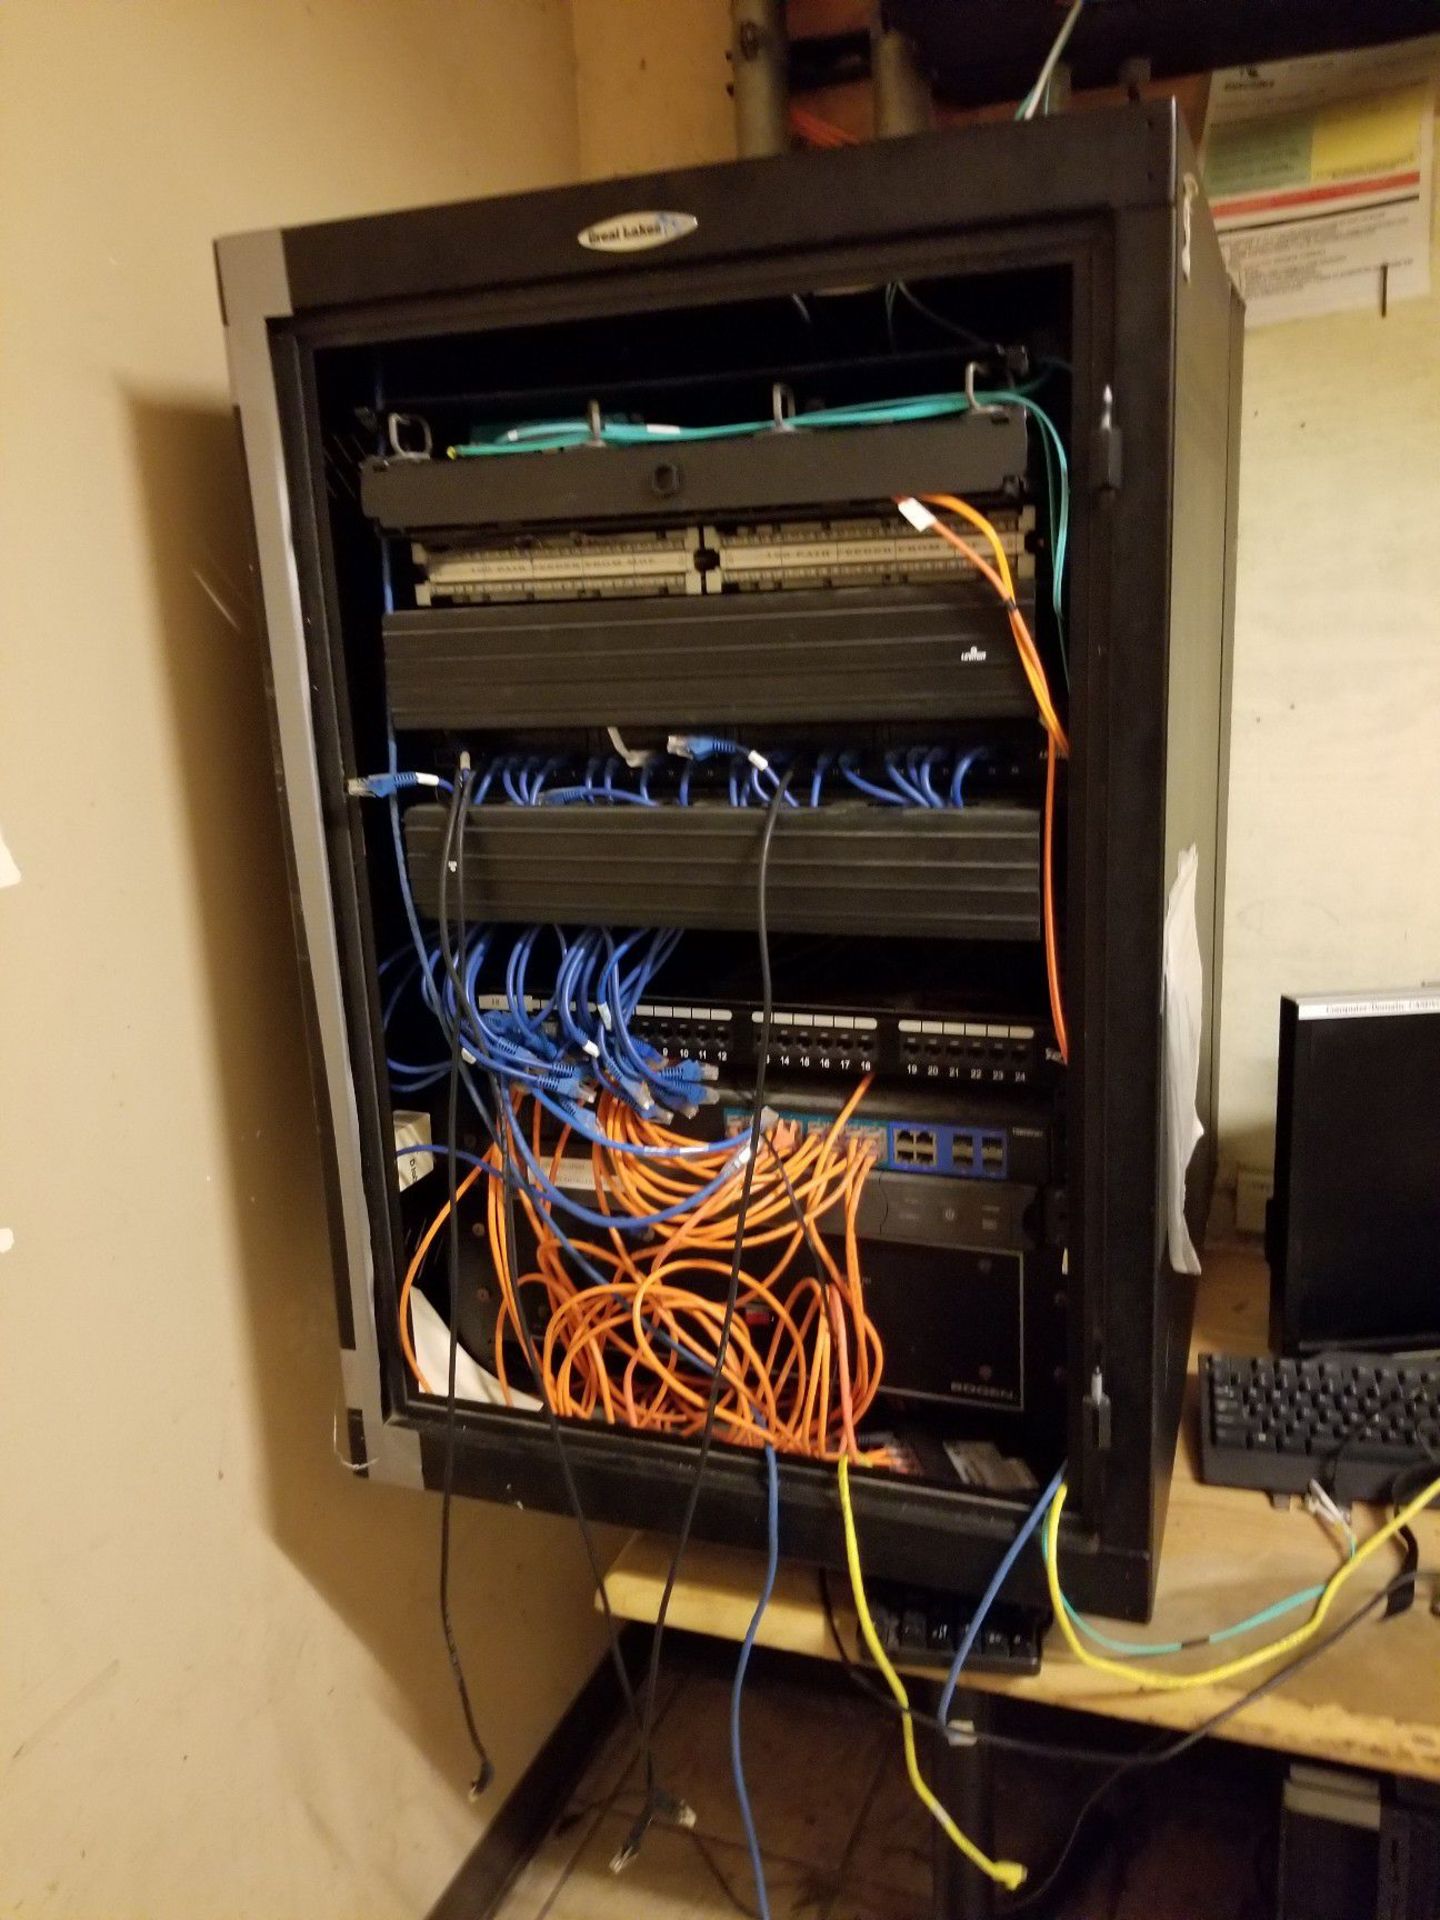 SERVER RACK W/ SWITCHES, ELECTRICAL COMMUNICATION SYSTEMS, MONITORS, COMPUTER, DESK, ETC. (